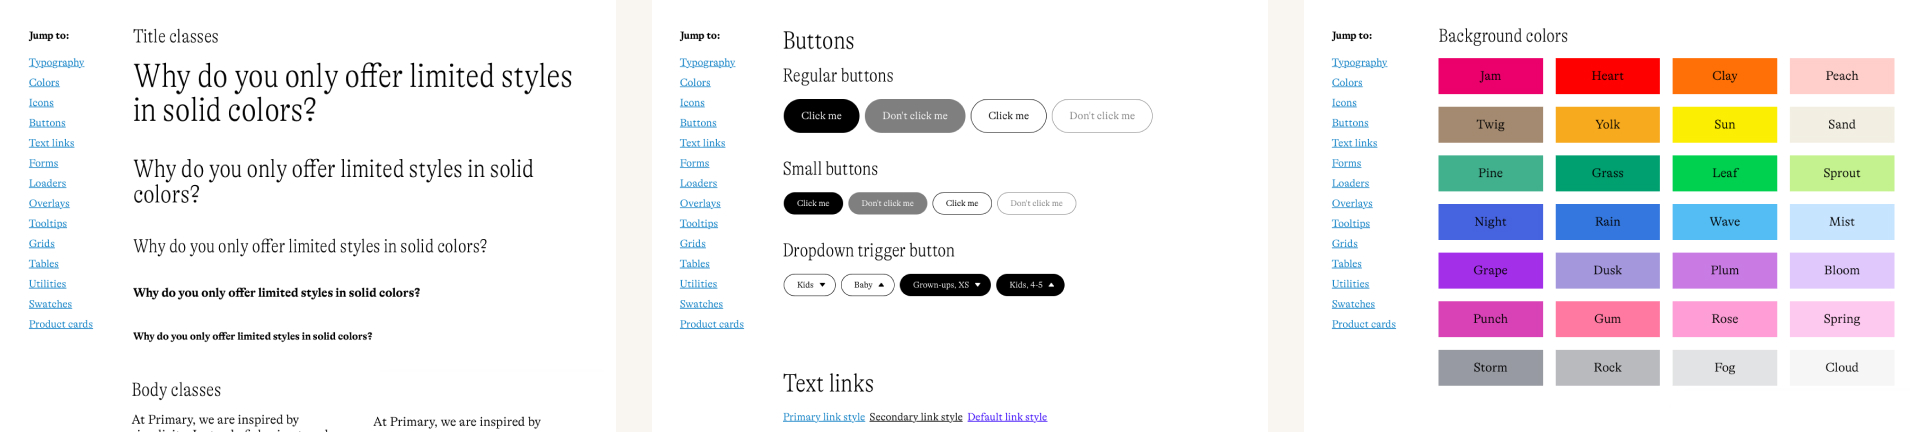 Screenshot of the  styleguide guidelines, updated to match the rebrand.